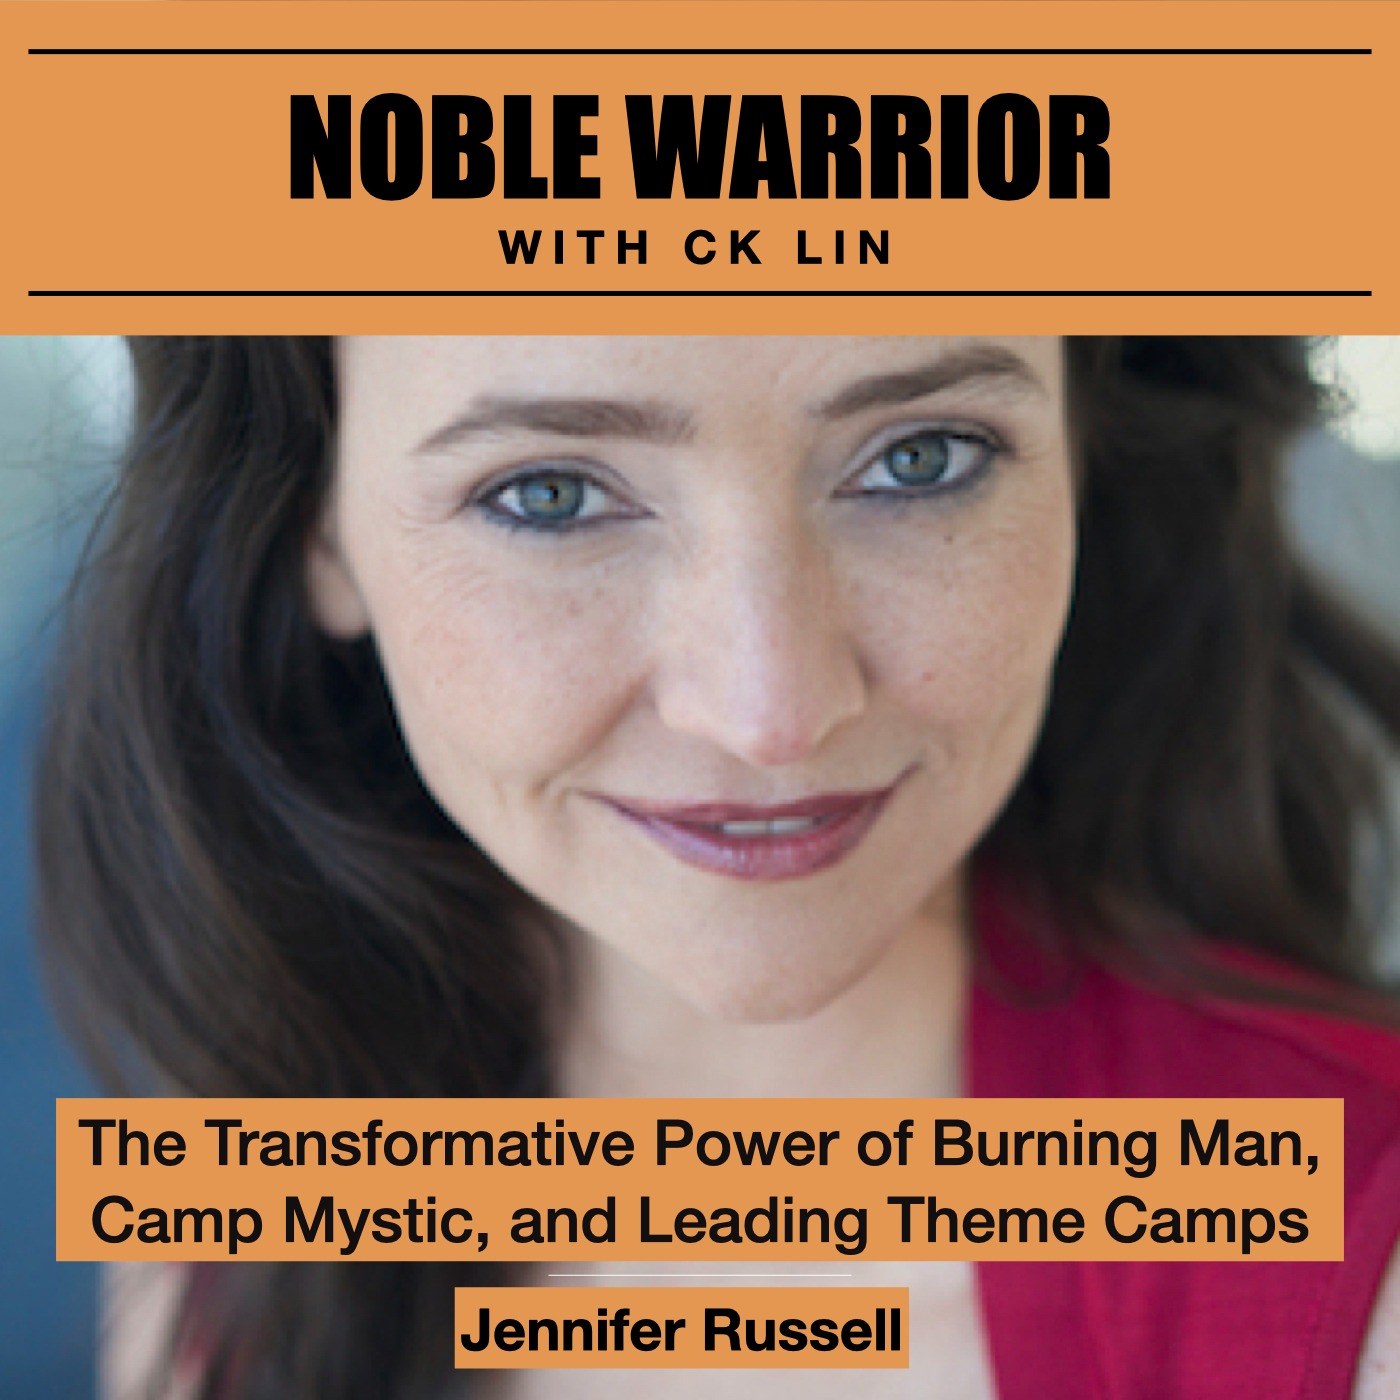 158 Jennifer Russell: The Transformative Power of Burning Man, Camp Mystic, and Leading Theme Camps Image